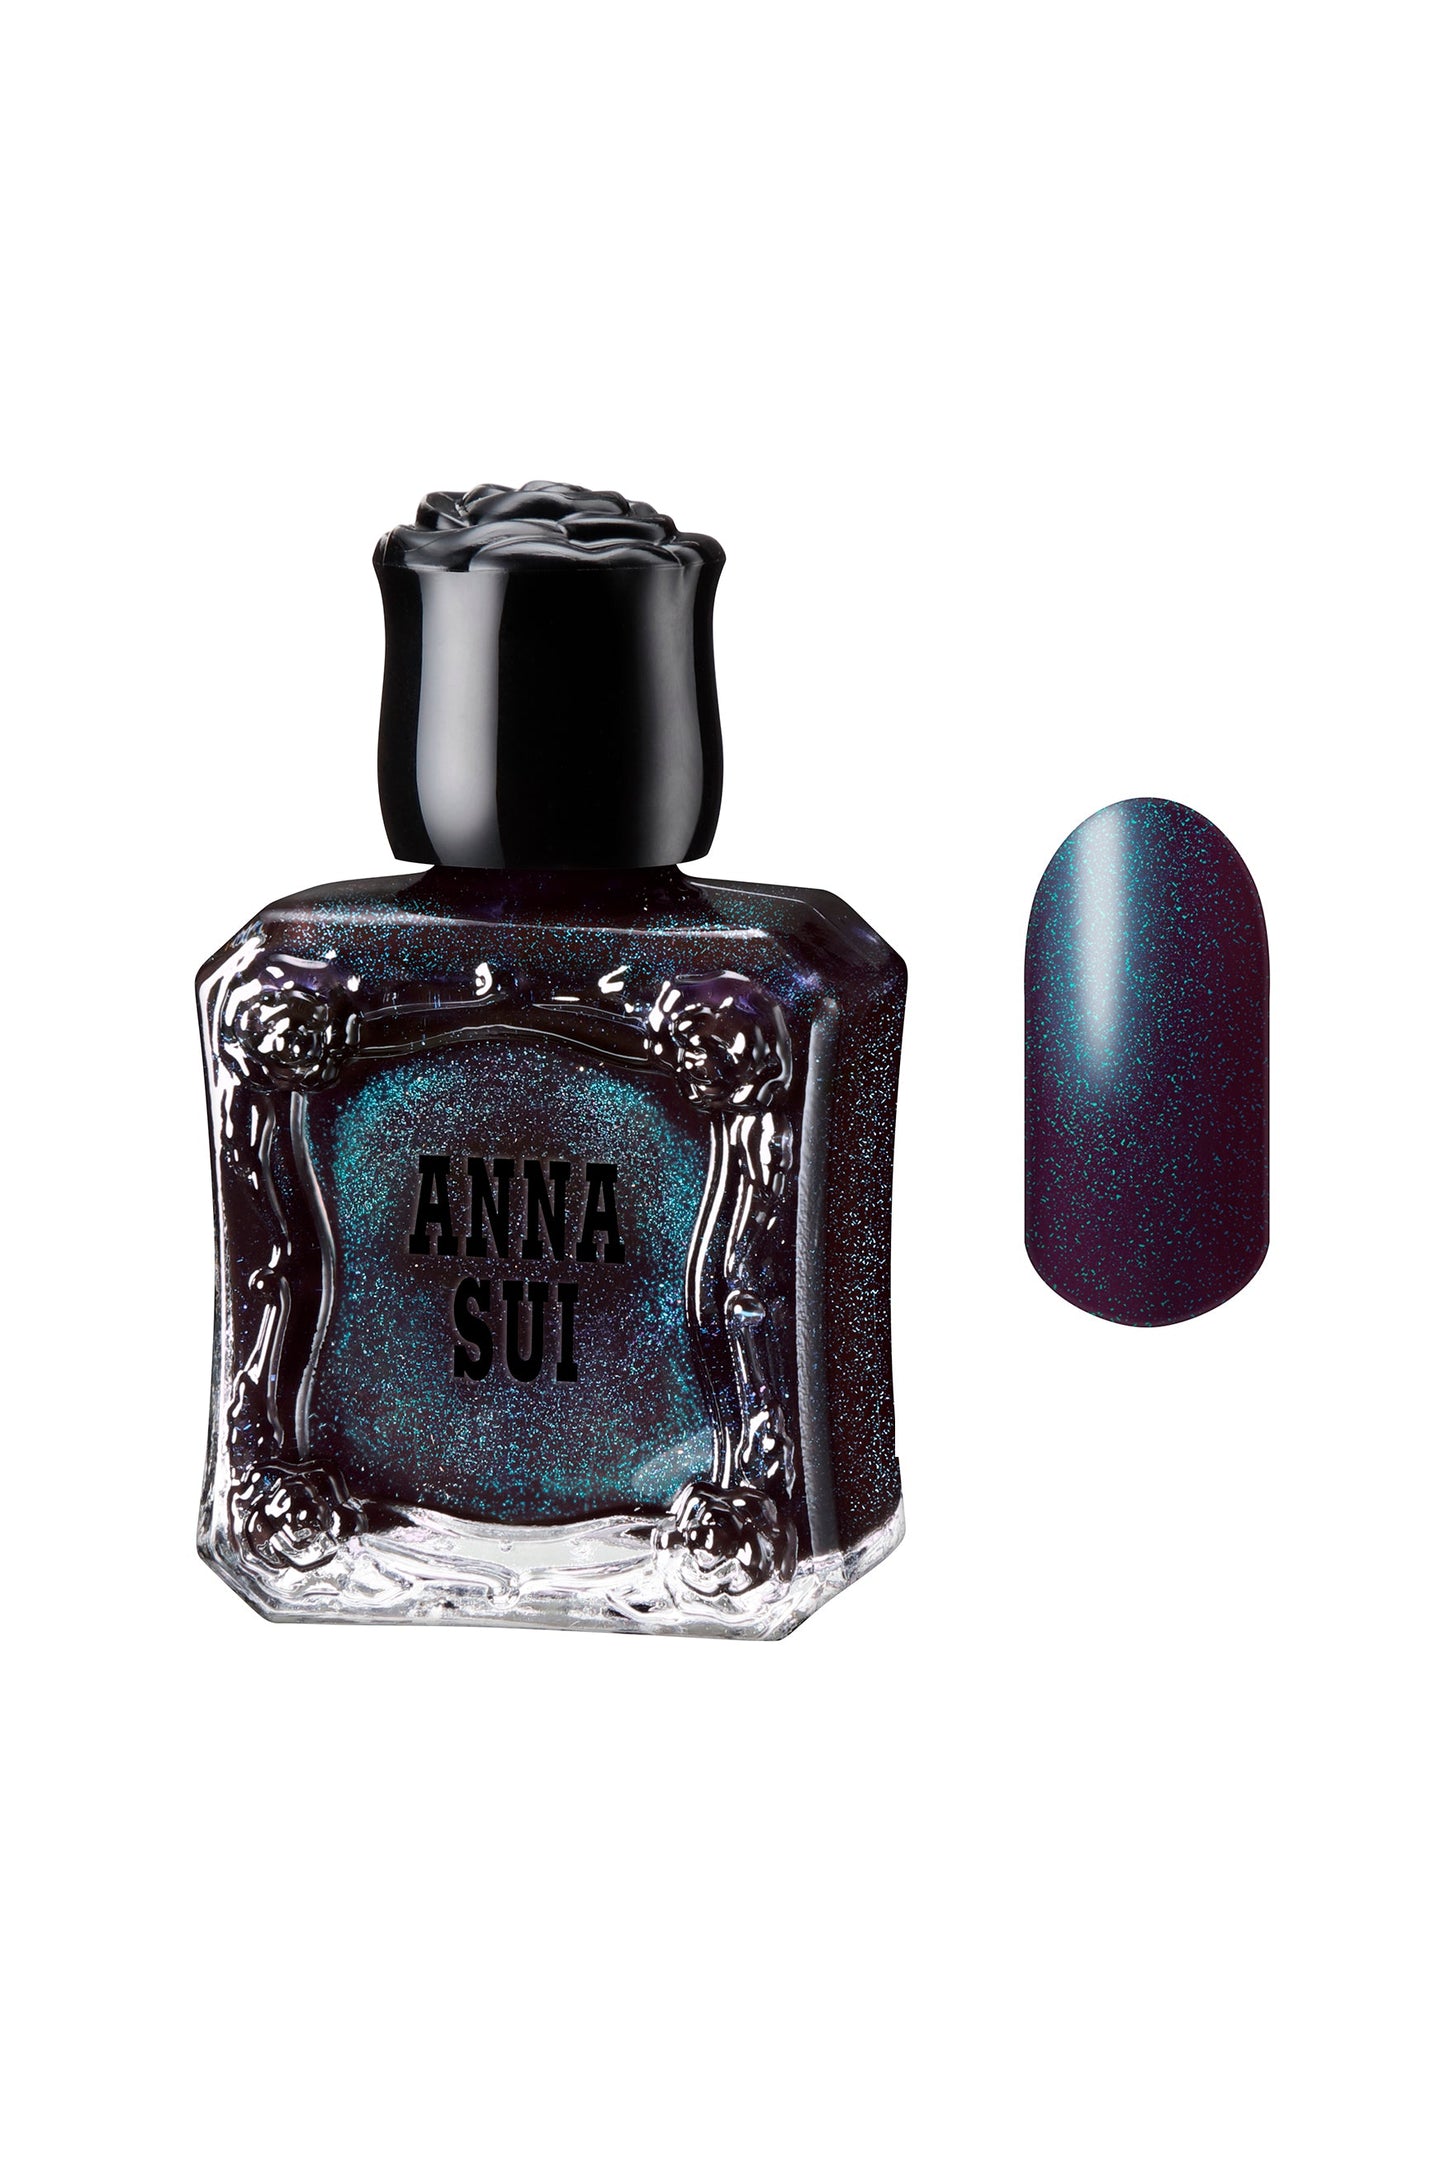 MIDNIGHT BLUE GLITTER: black cap rose shape, with Anna Sui floral design and label